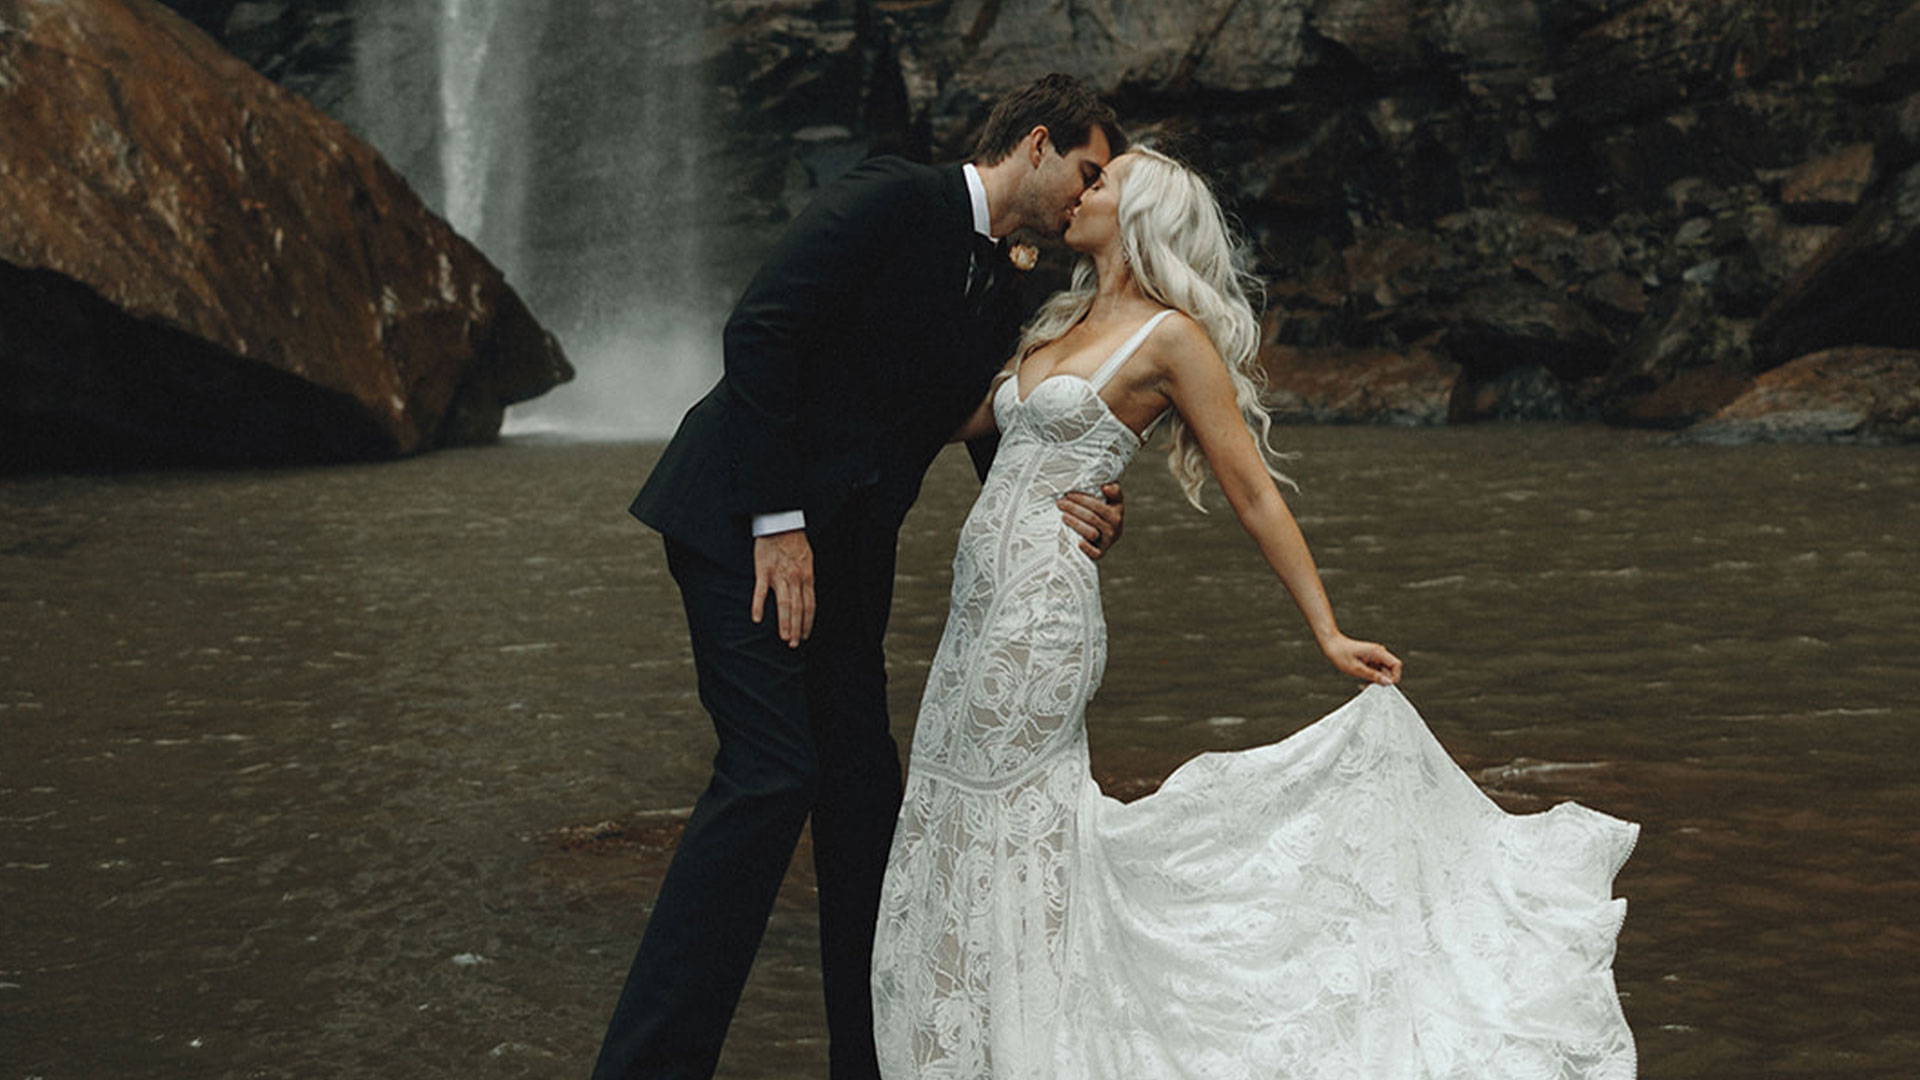 Thomas and Tiffany sharing a kiss in front of a waterfall